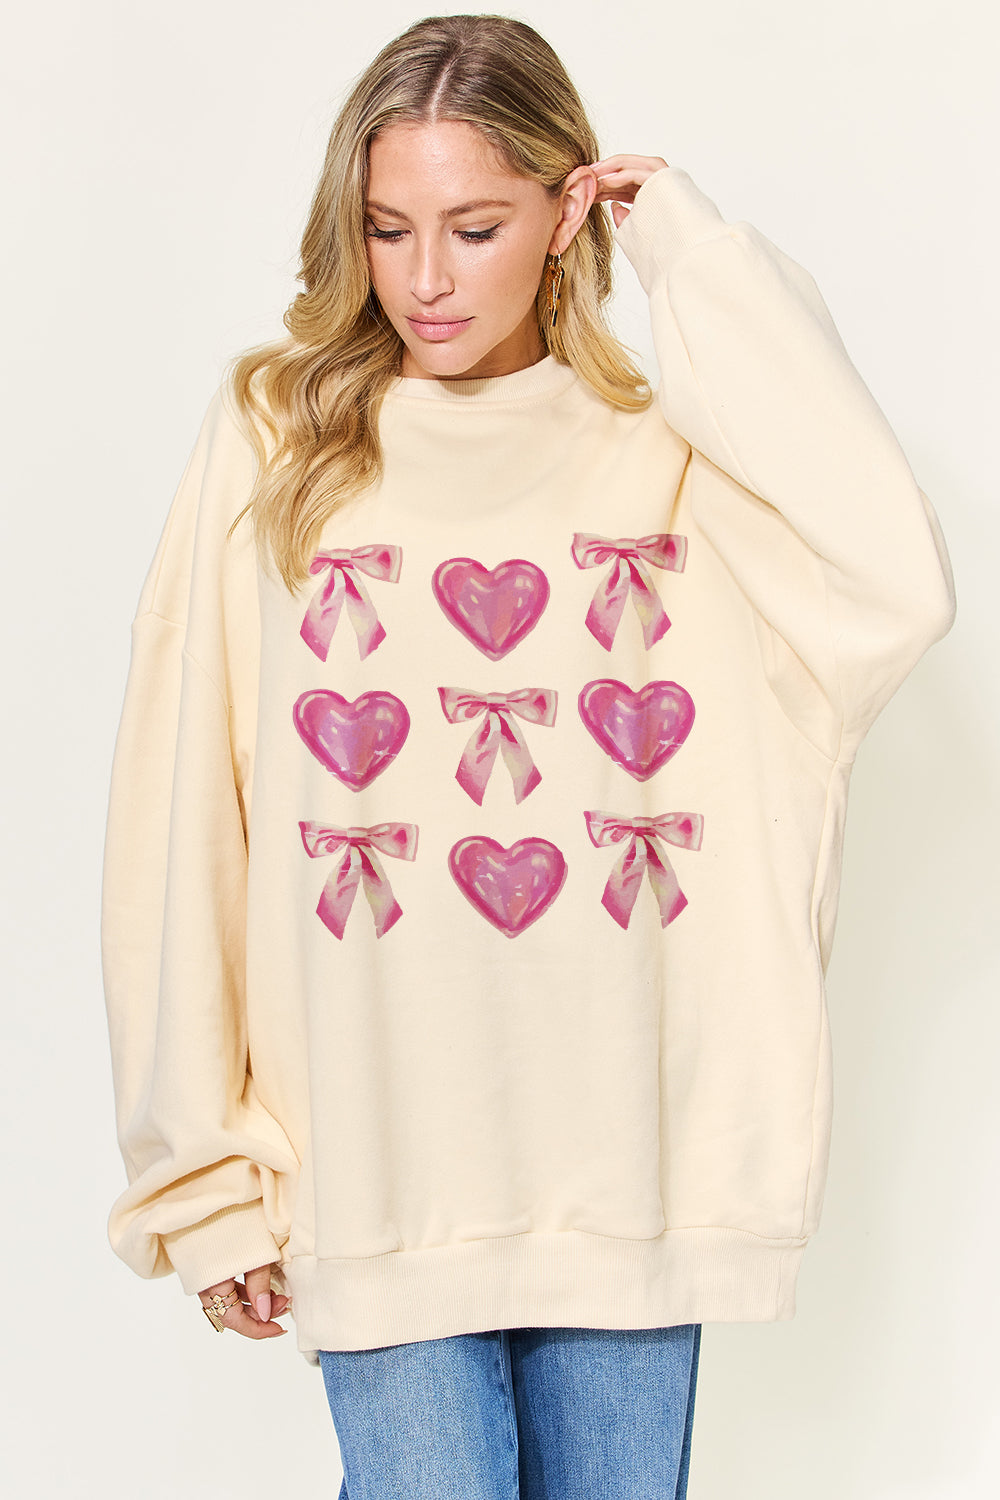 Simply Love Full Size Bow & Heart Graphic Long Sleeve Sweatshirt  | KIKI COUTURE